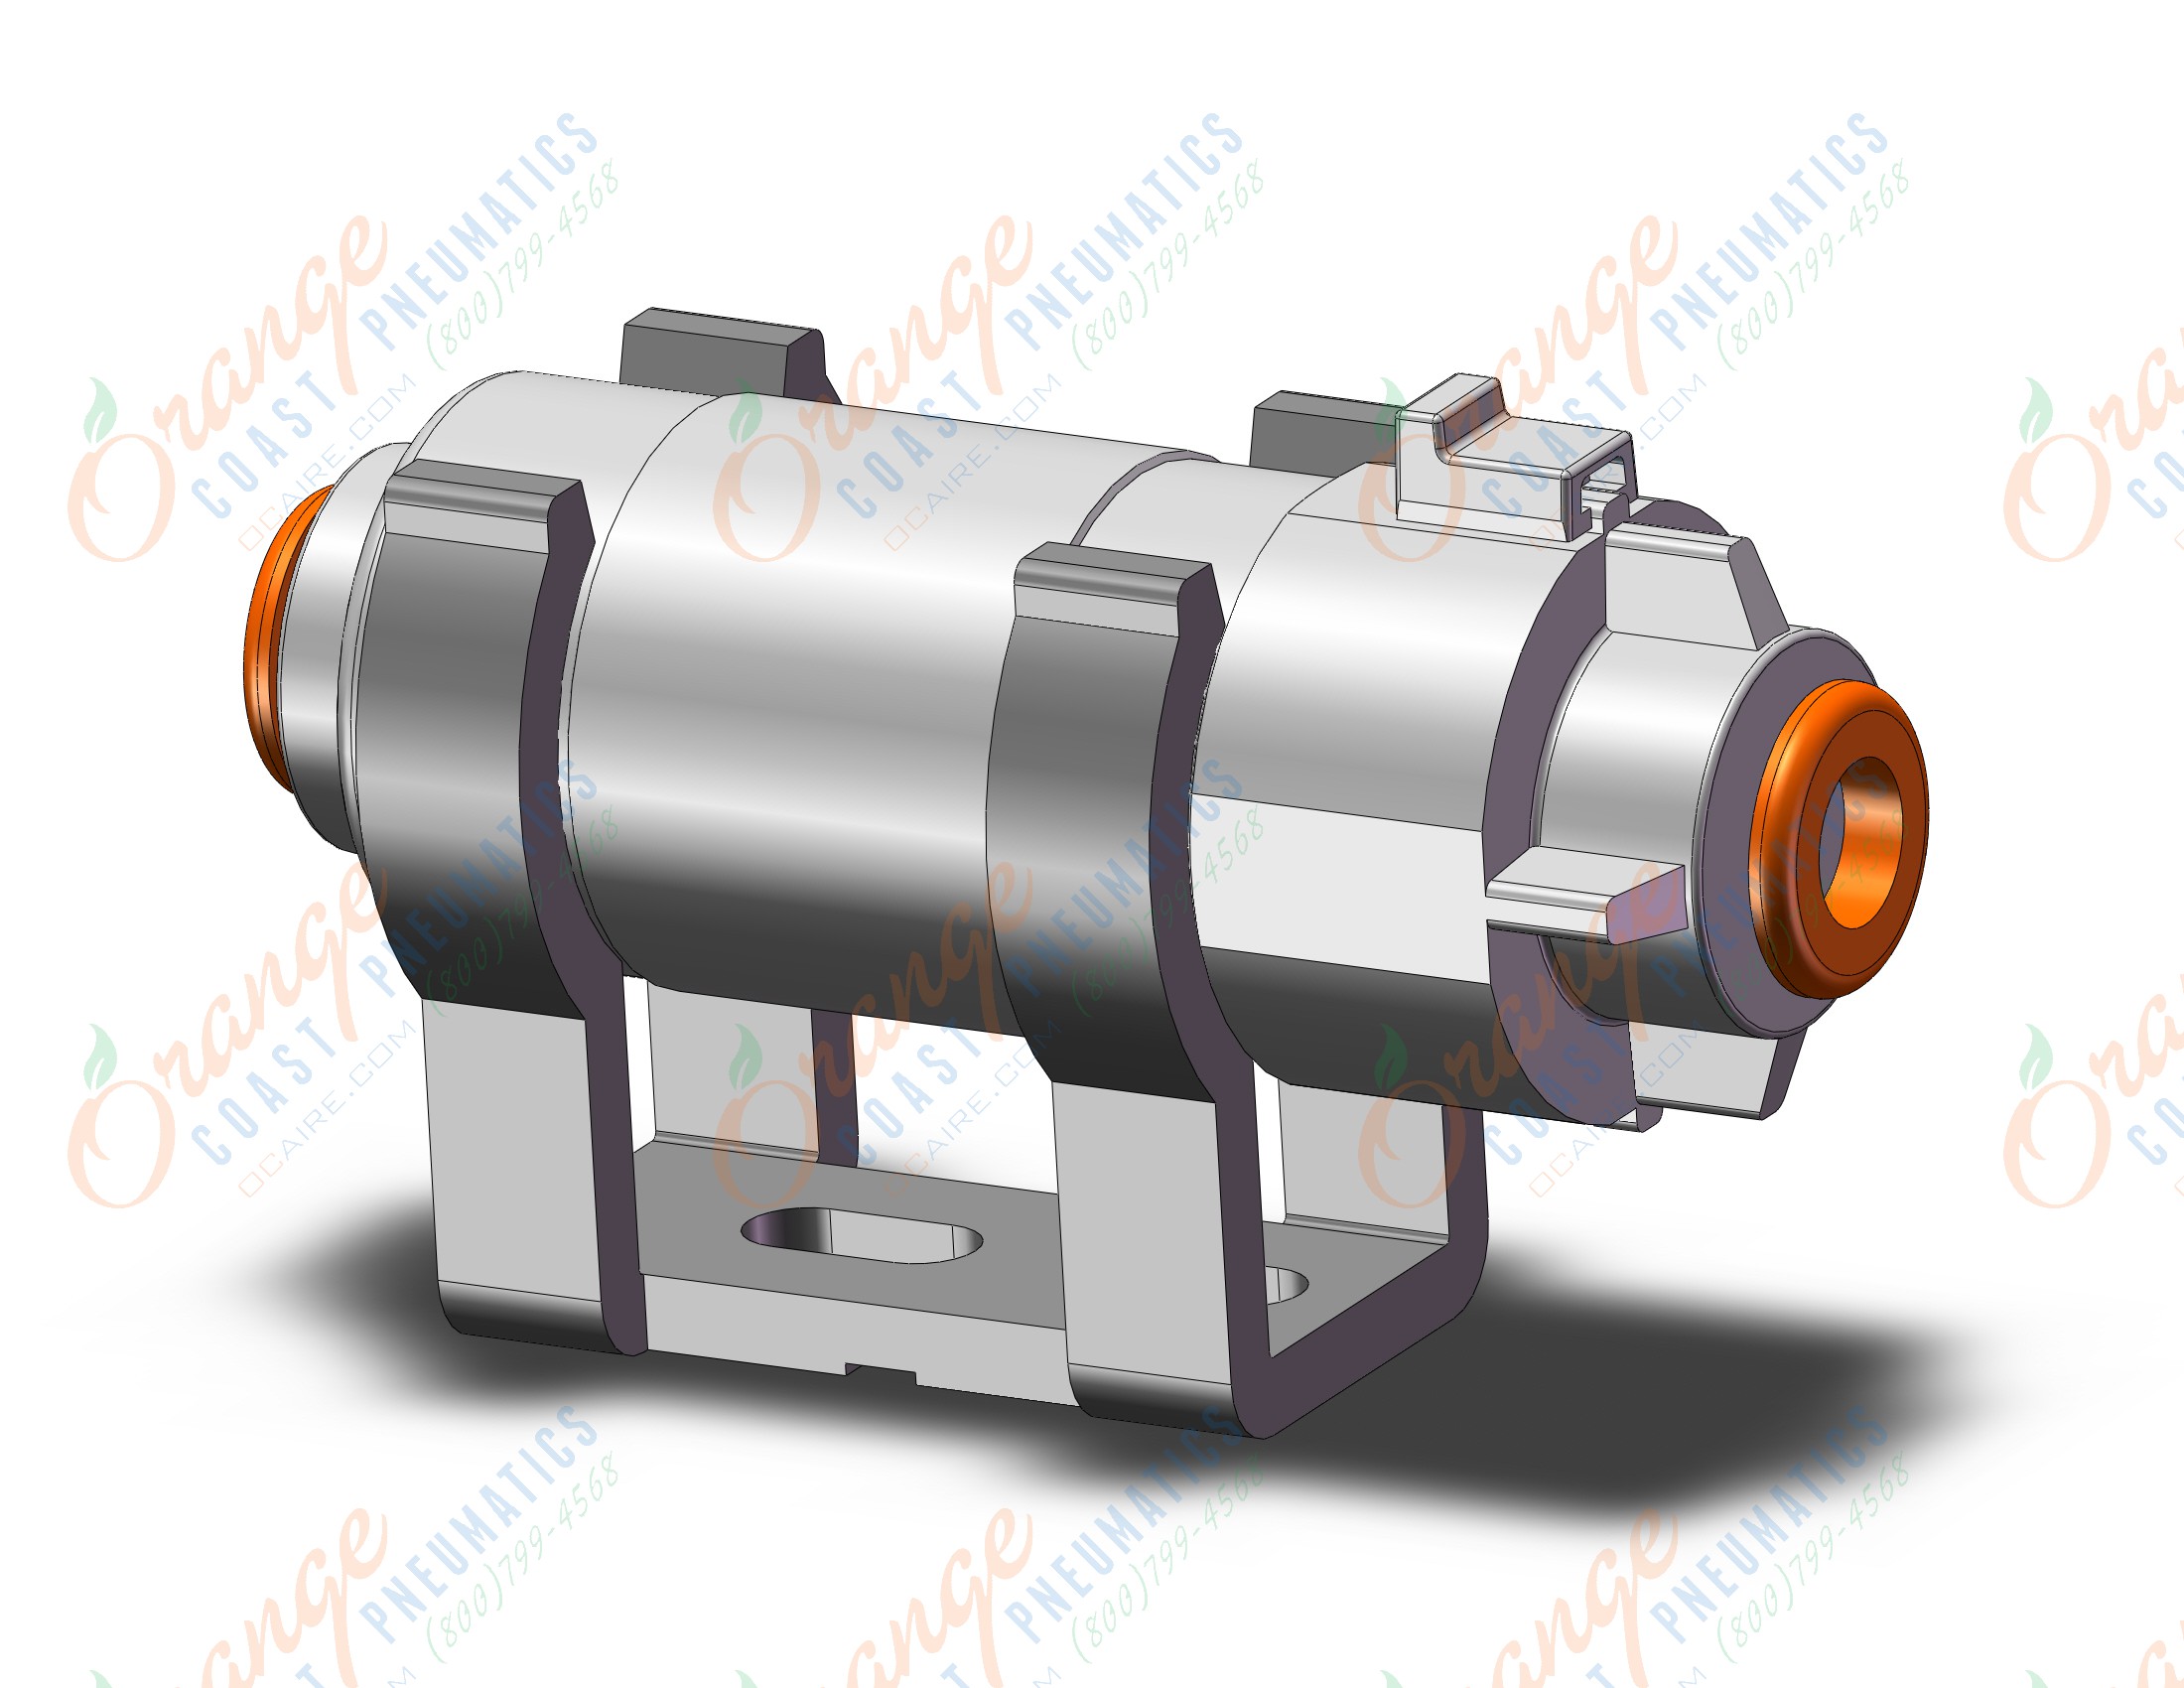 SMC ZFC7D-B-X06 suction filter, ZFC VACUUM FILTER W/FITTING***